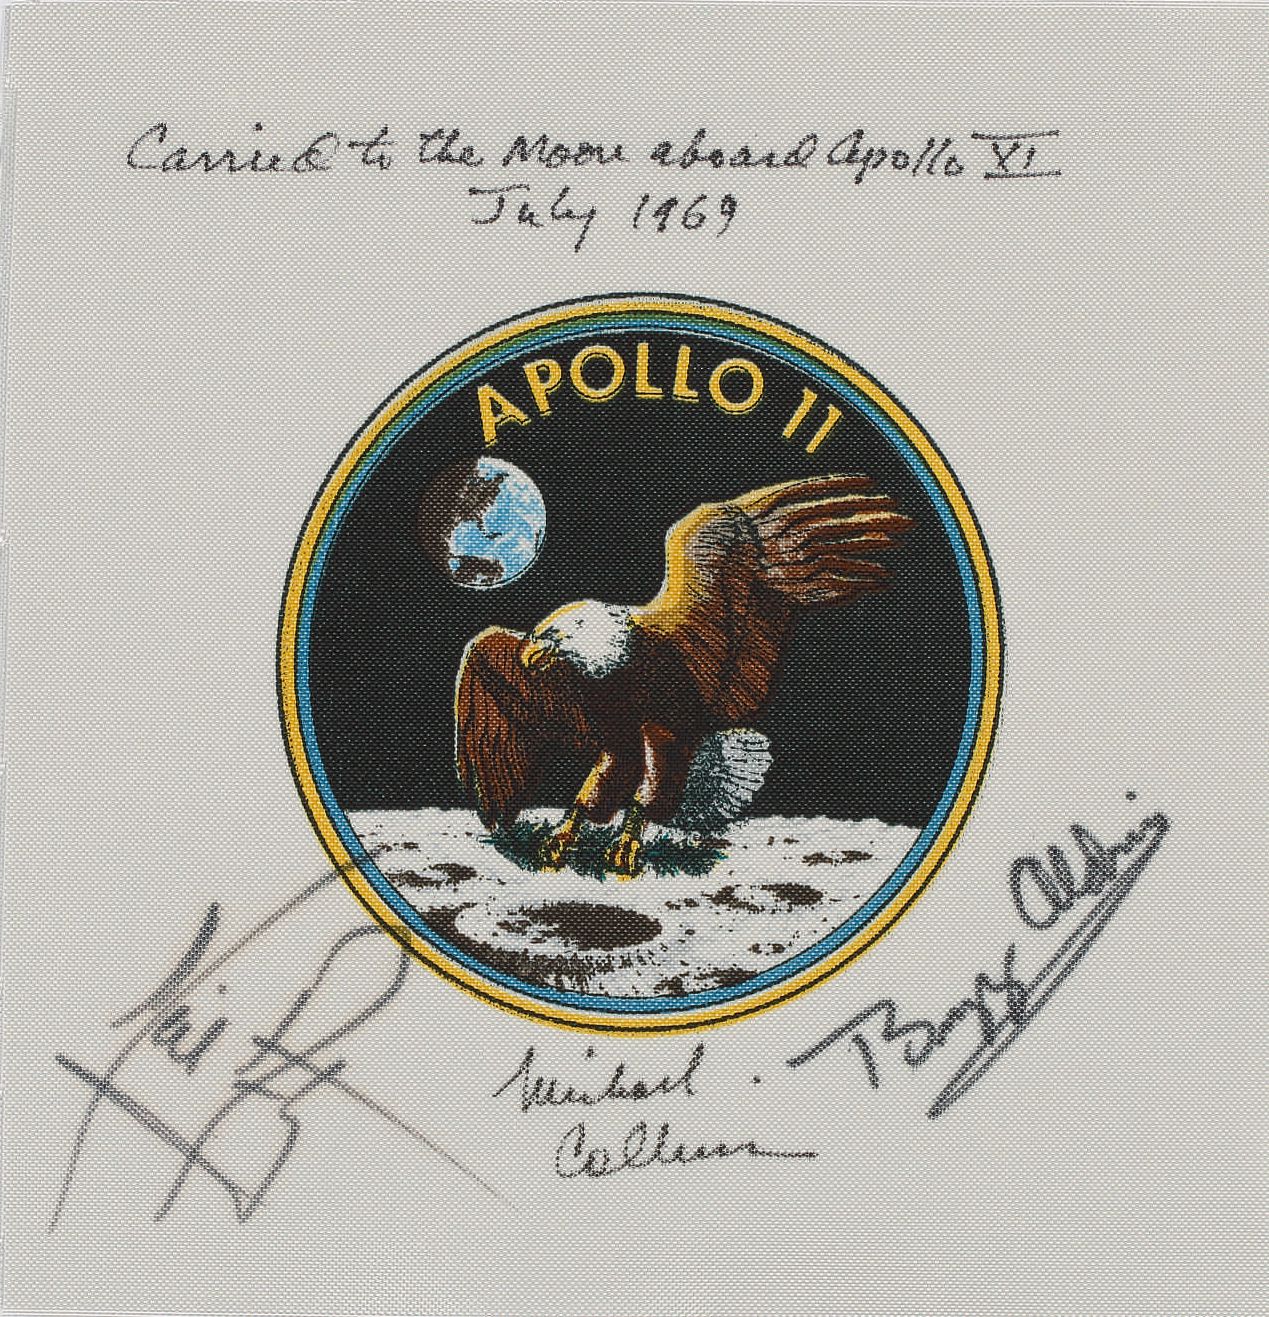 Flown to the Moon on Apollo 11-Command Module Pilot Michael Collins’ Crew-Signed Apollo 11 Emblem. One of the very flew flown Apollo 11 mission artifacts to be signed by Neil Armstrong.